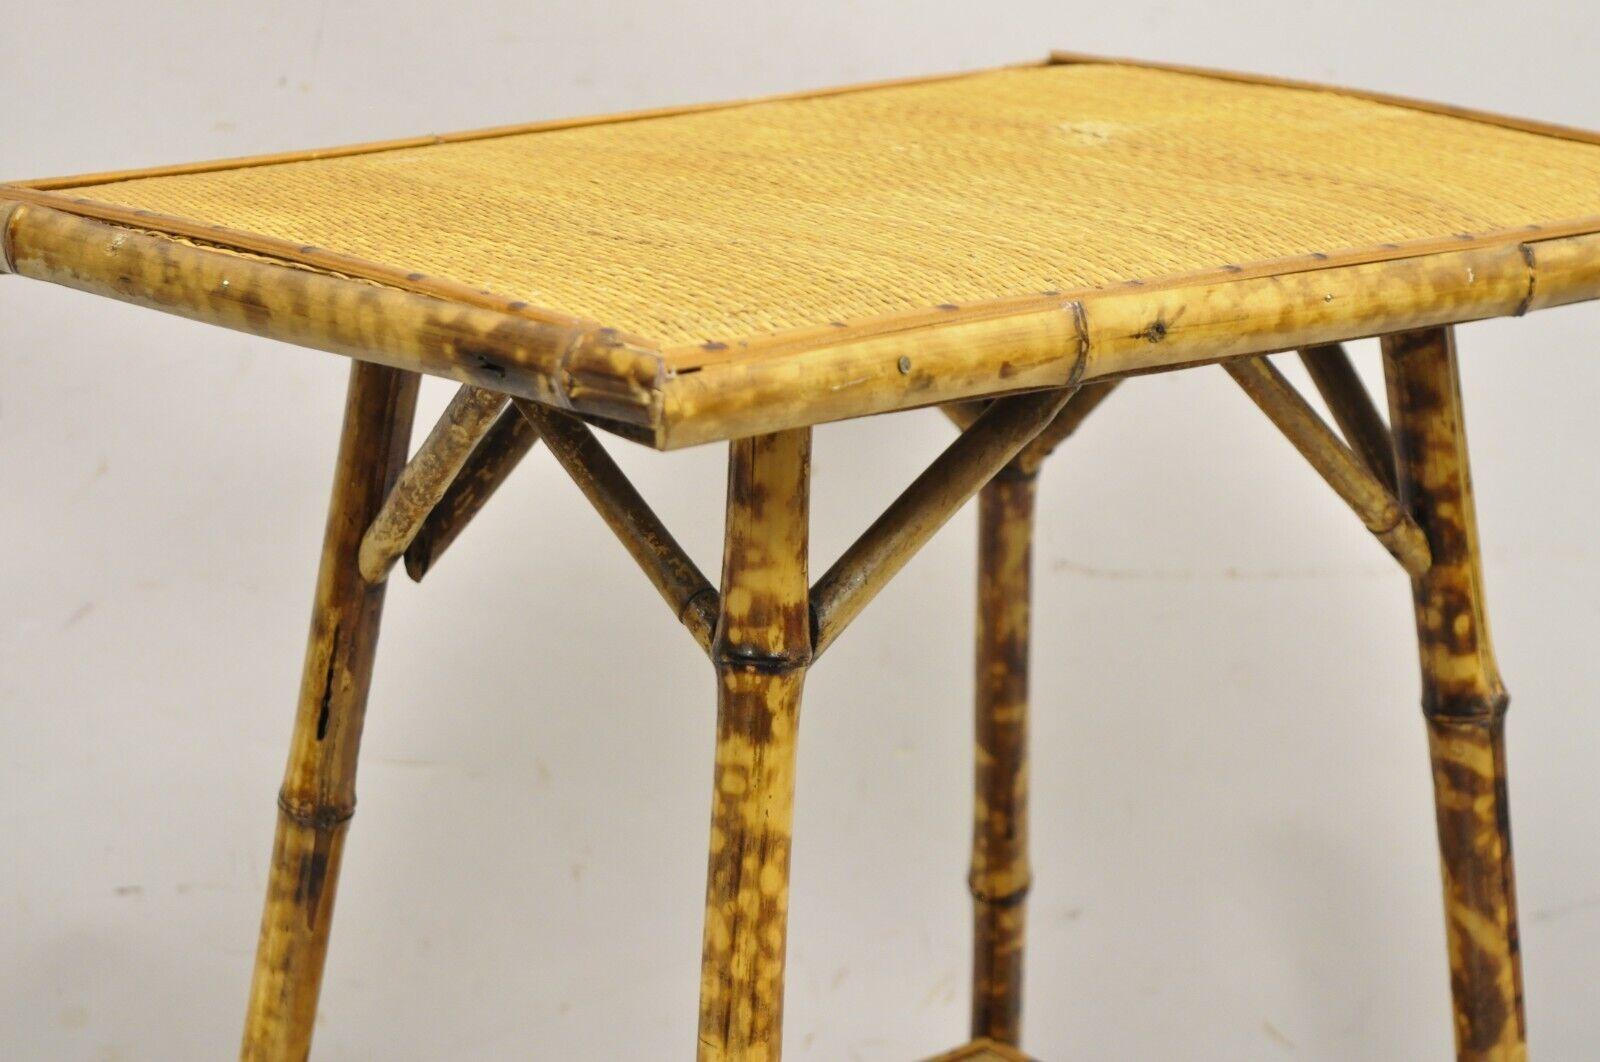 Early 20th Century Antique English Victorian Bamboo and Cane 2 Tier Plant Stand Side Table For Sale